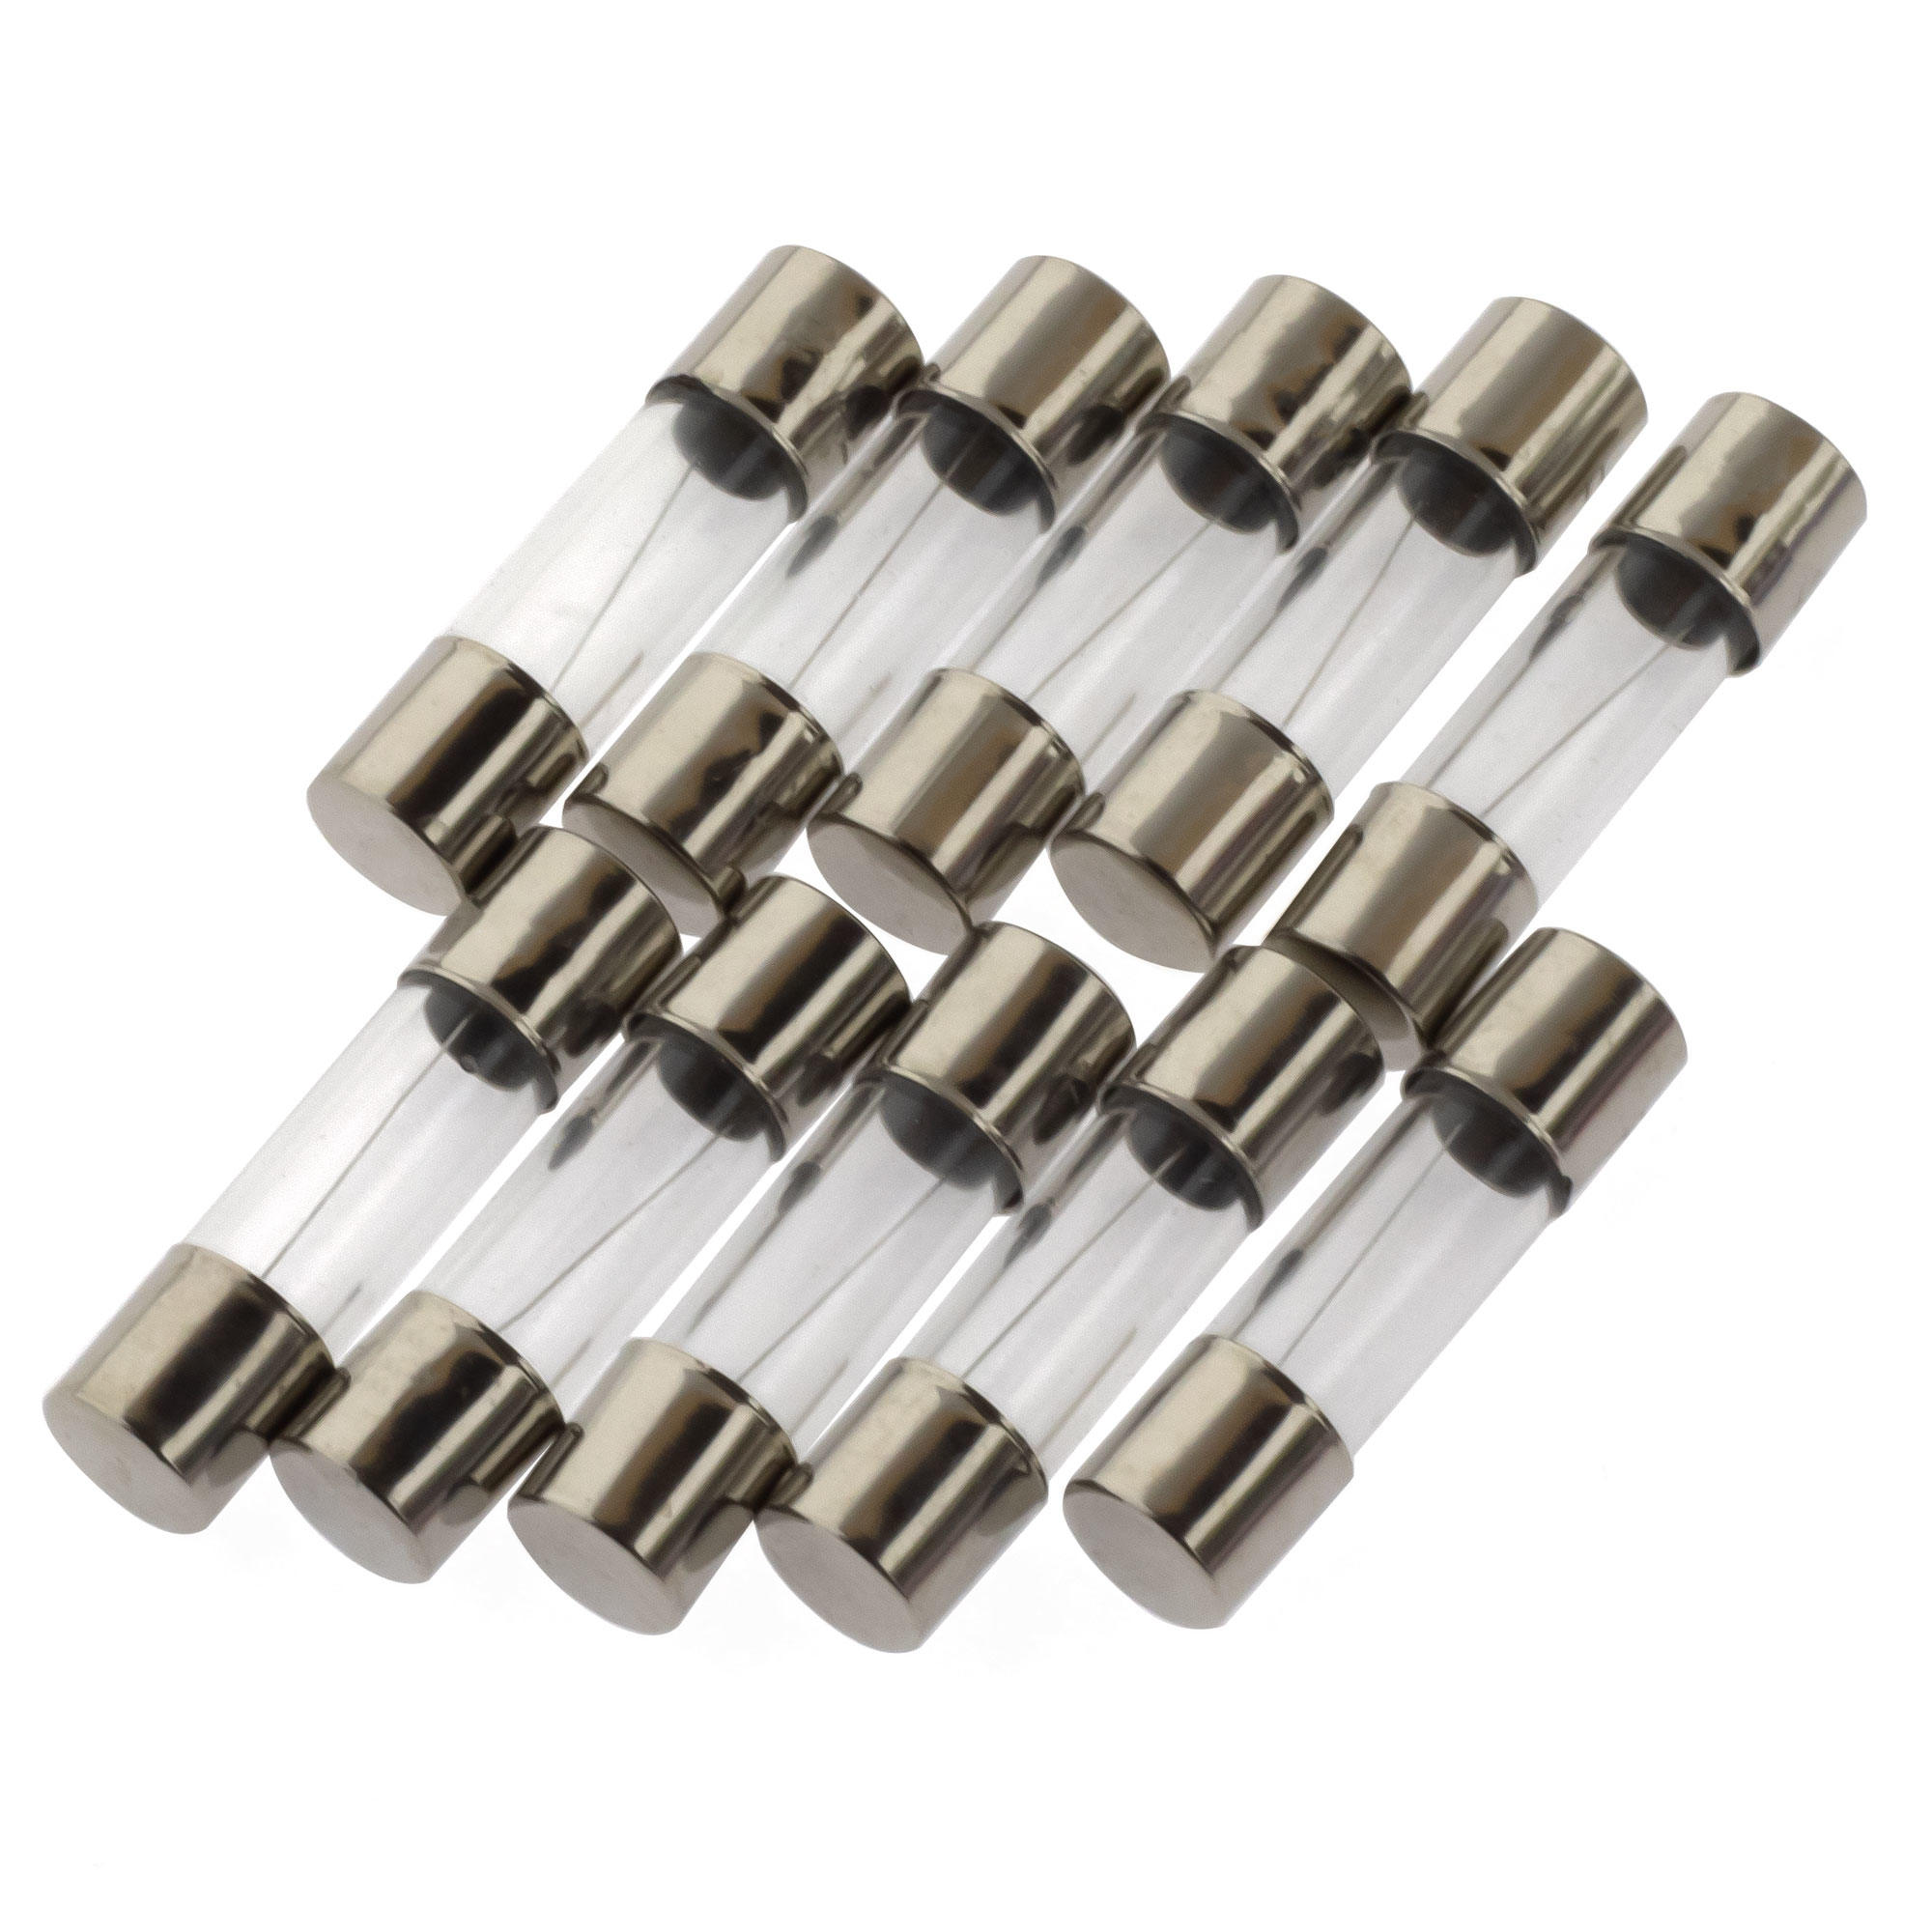 Micro Fuse 6,3A, 5x20mm, quick acting